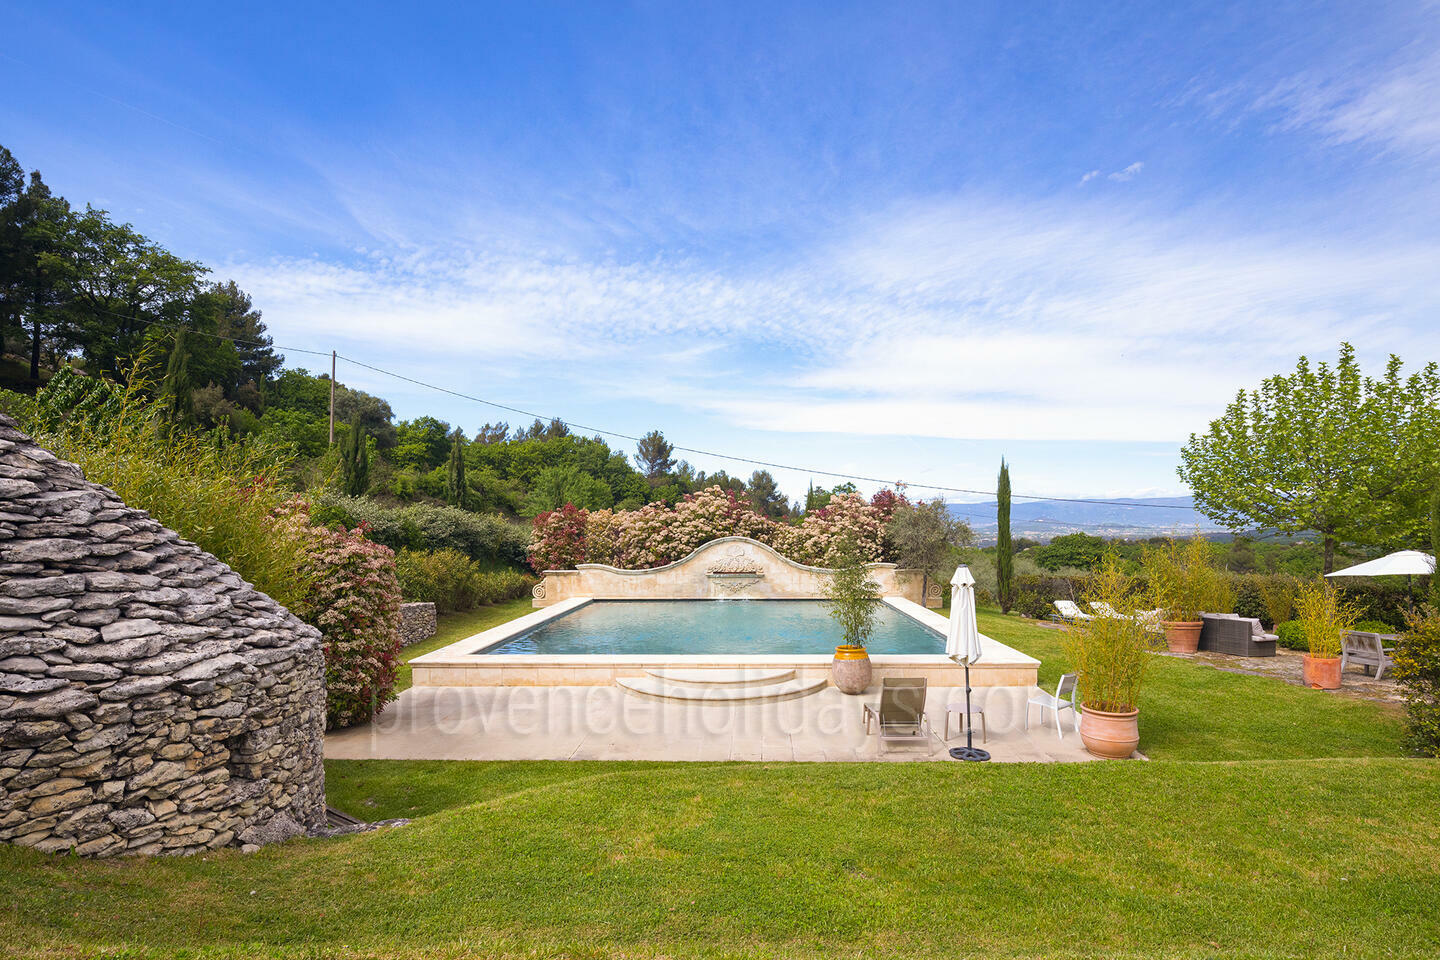 21 - Outstanding Property with Wonderful Views of the Luberon: Villa: Exterior